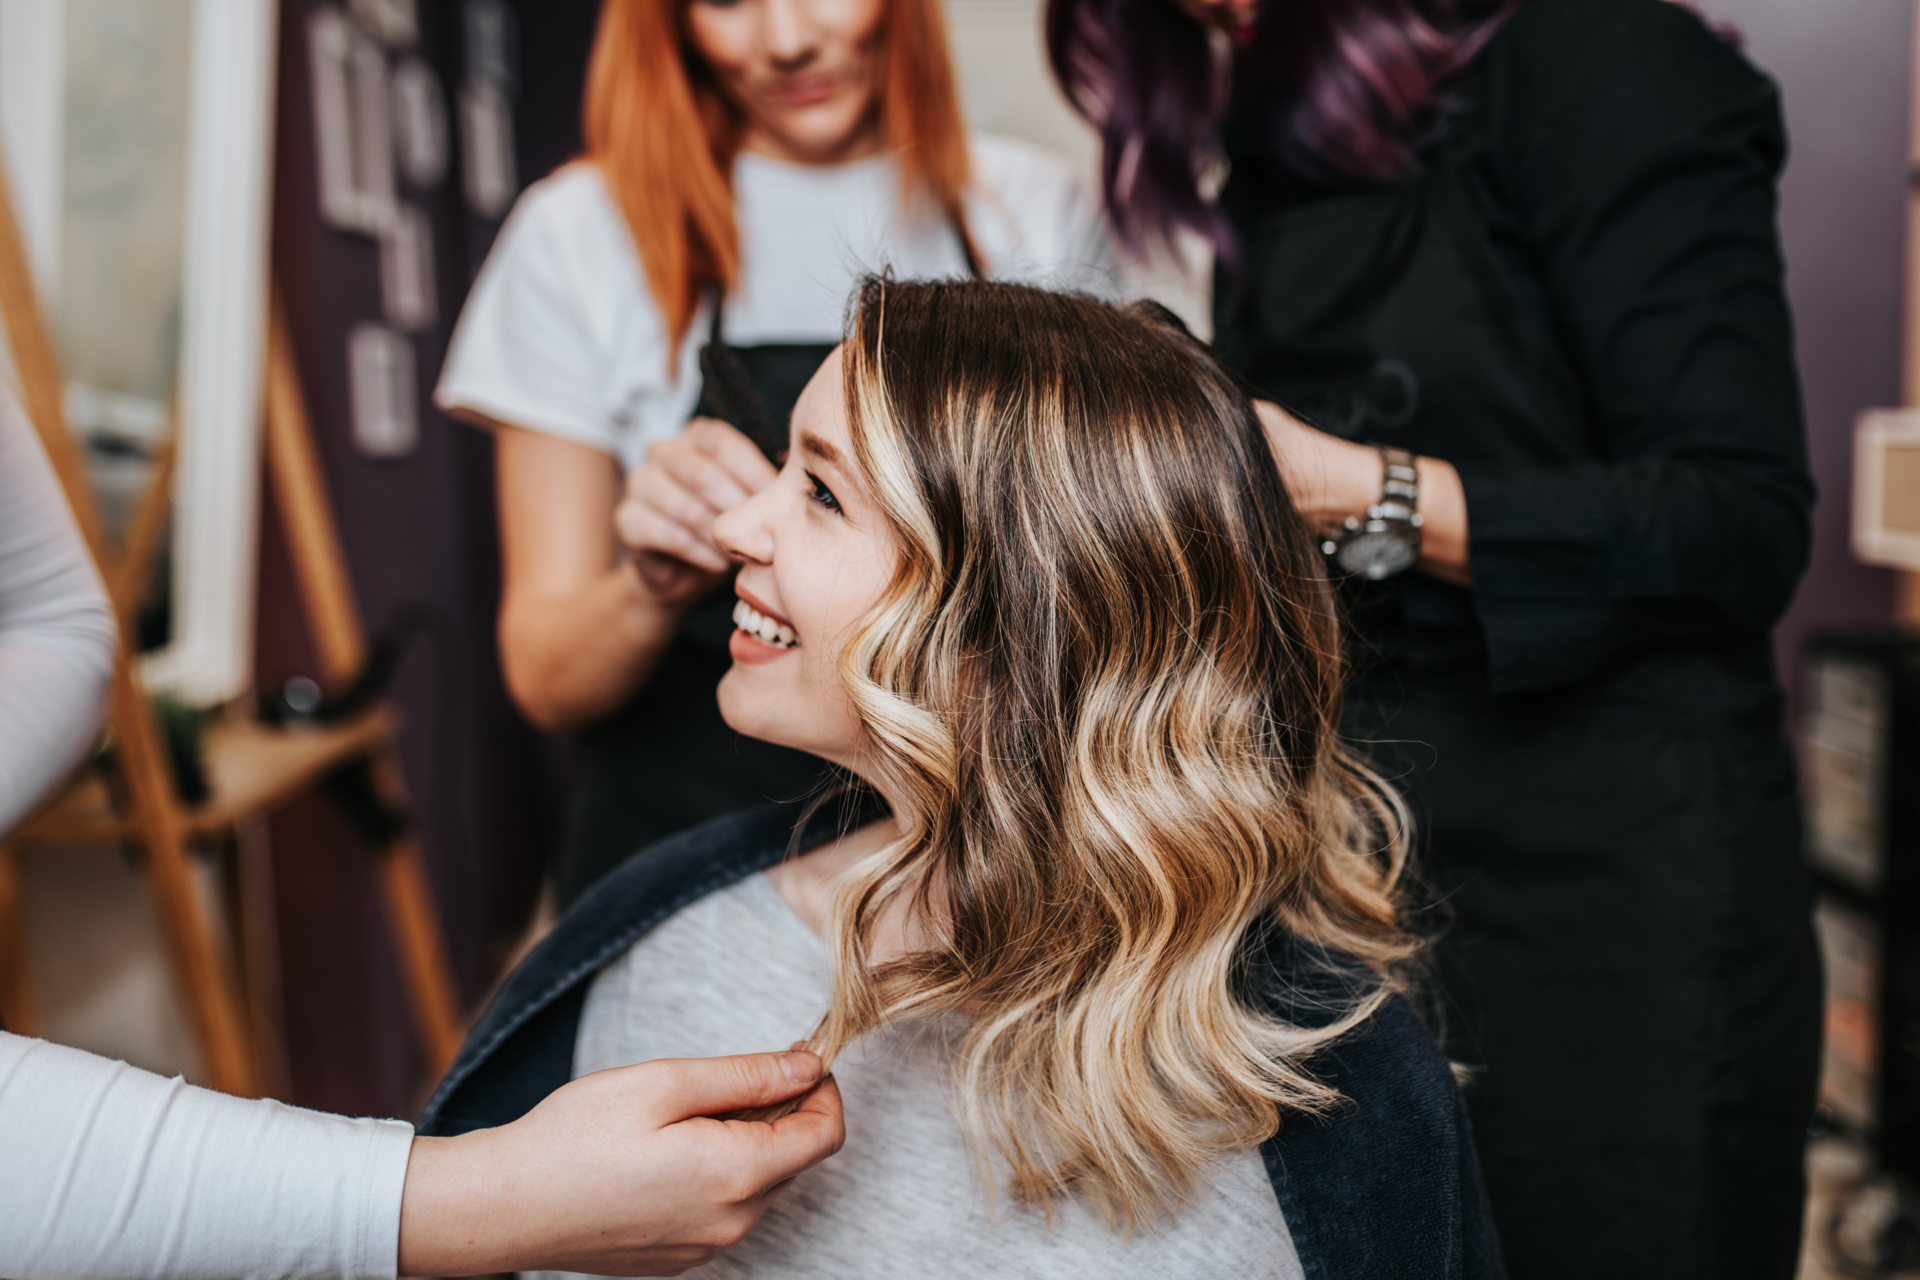 Hair salon conversation topics | How to talk to clients in the salon?